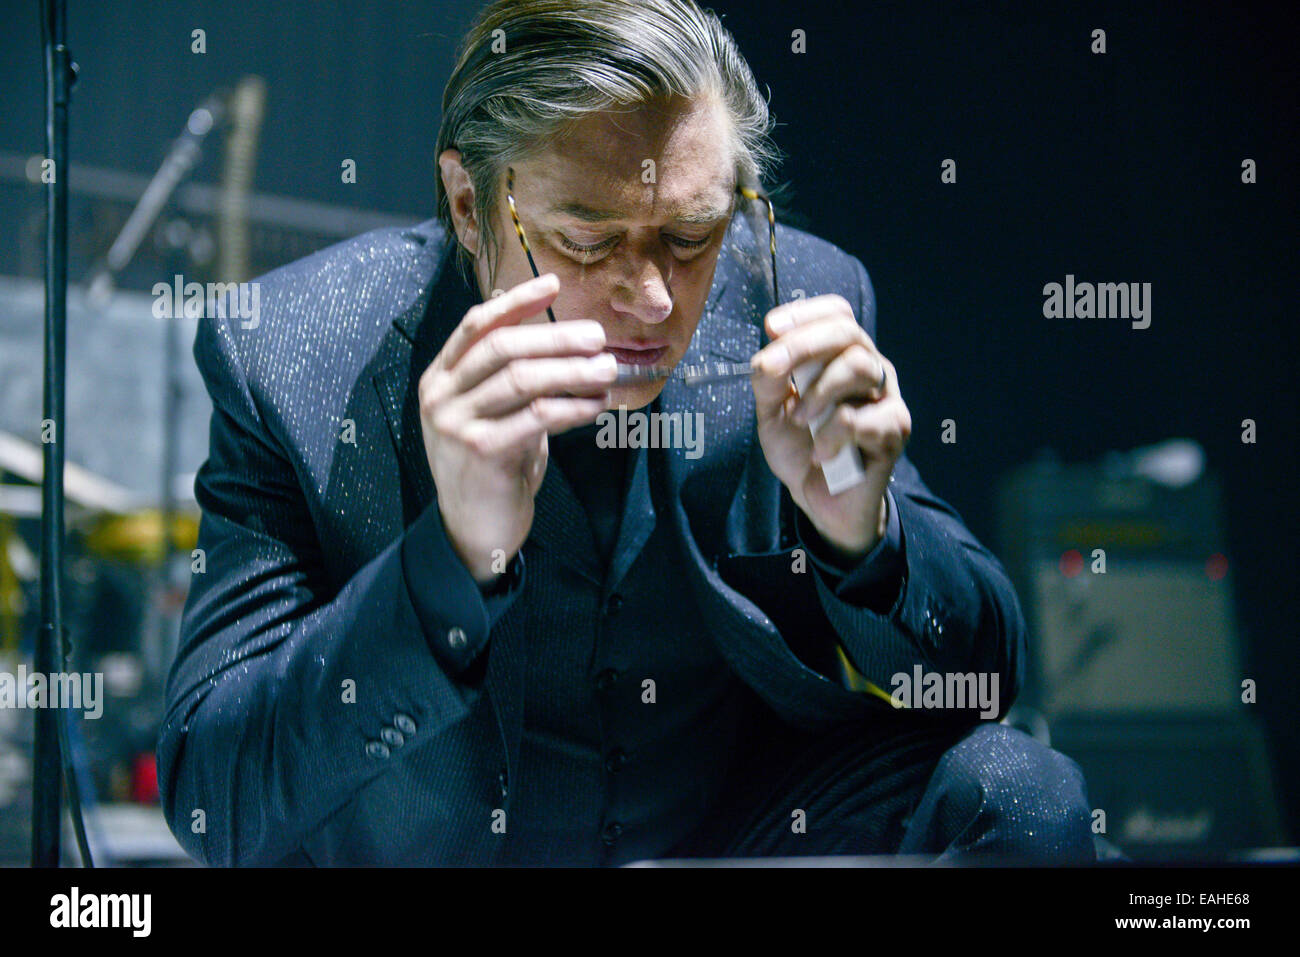 Blixa Bargeld, singer of the German band 'Einstuerzende Neubauten,' takes off his reading glasses after glancing at the set list on the edge of the stage during the concert in Tempodrom in Berlin, Germany, 11 November 2014. Their new album 'Lament,' which is deals with World War I, came out on 07 November 2014. Photo: Jason Harrell/dpa NO WIRE SERVICE Stock Photo